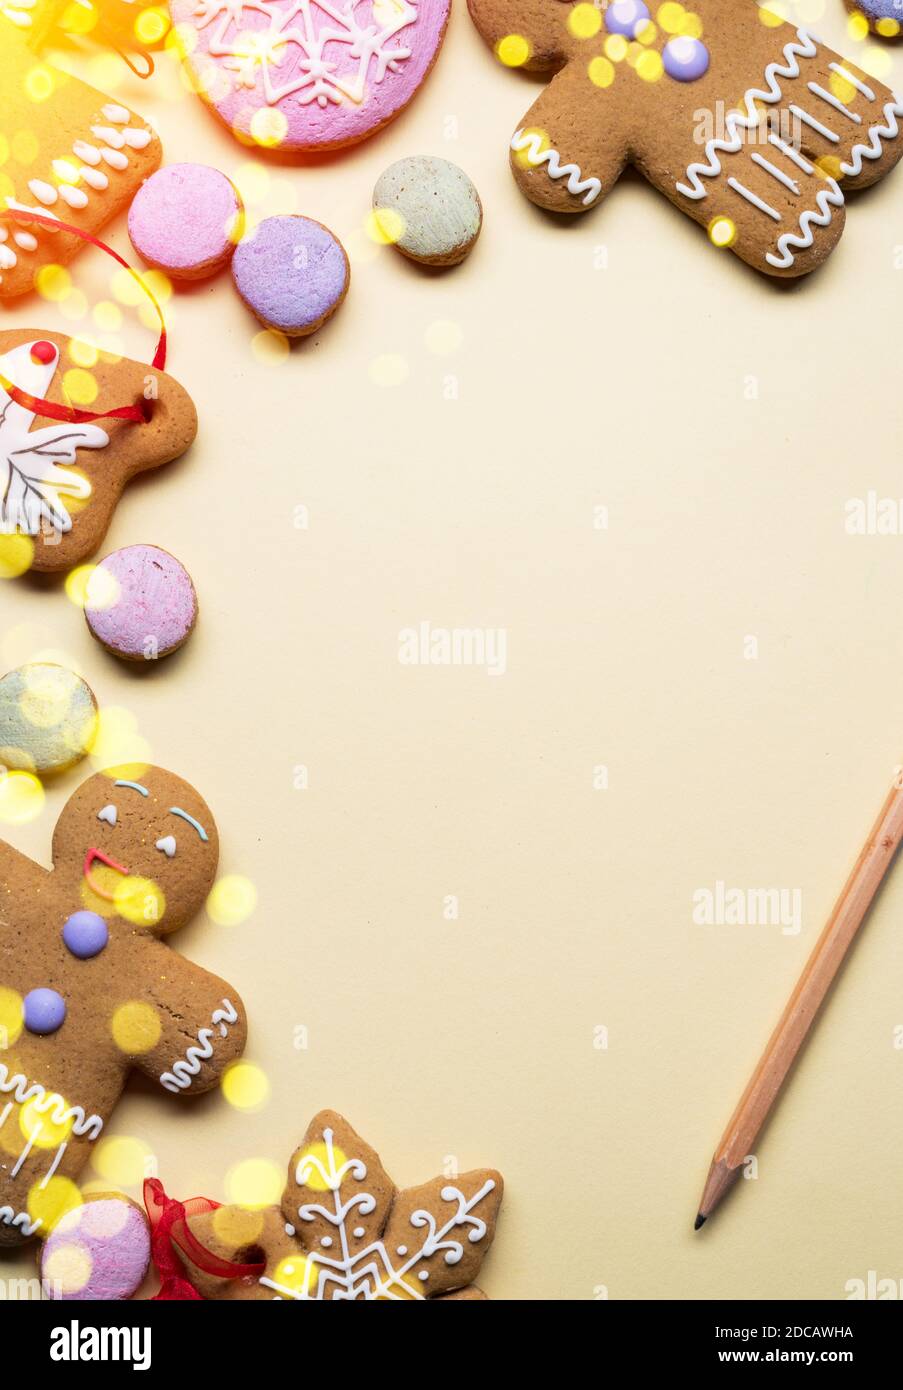 Empty Santa letter with Christmas traditional ginger cookies around it on wooden background. Christmas or New Year holiday background. Top view. Stock Photo